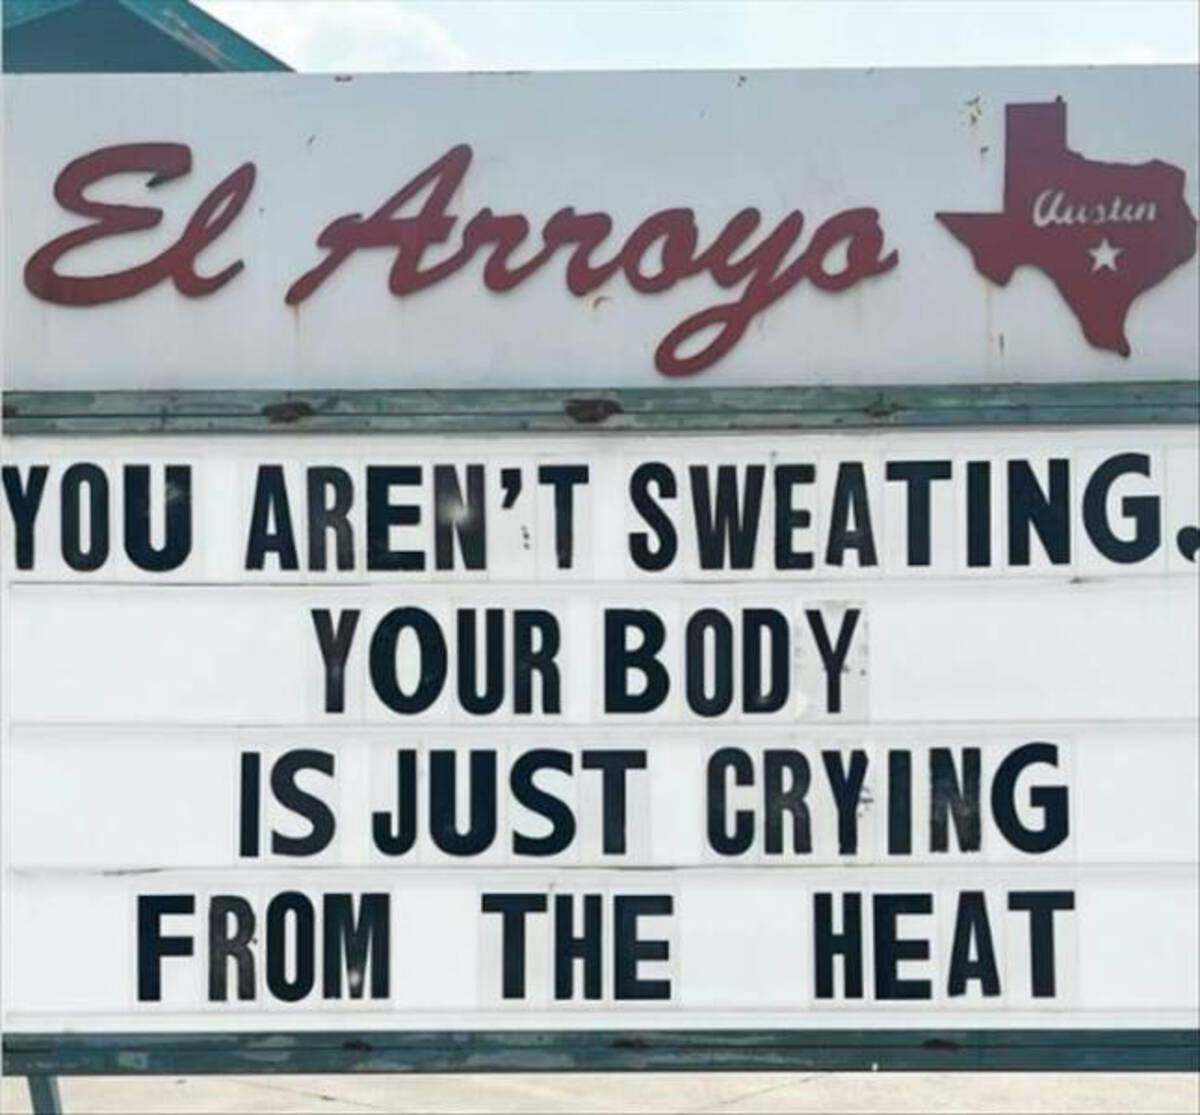 signage - El Arroyo Austin You Aren'T Sweating. Your Body Is Just Crying From The Heat